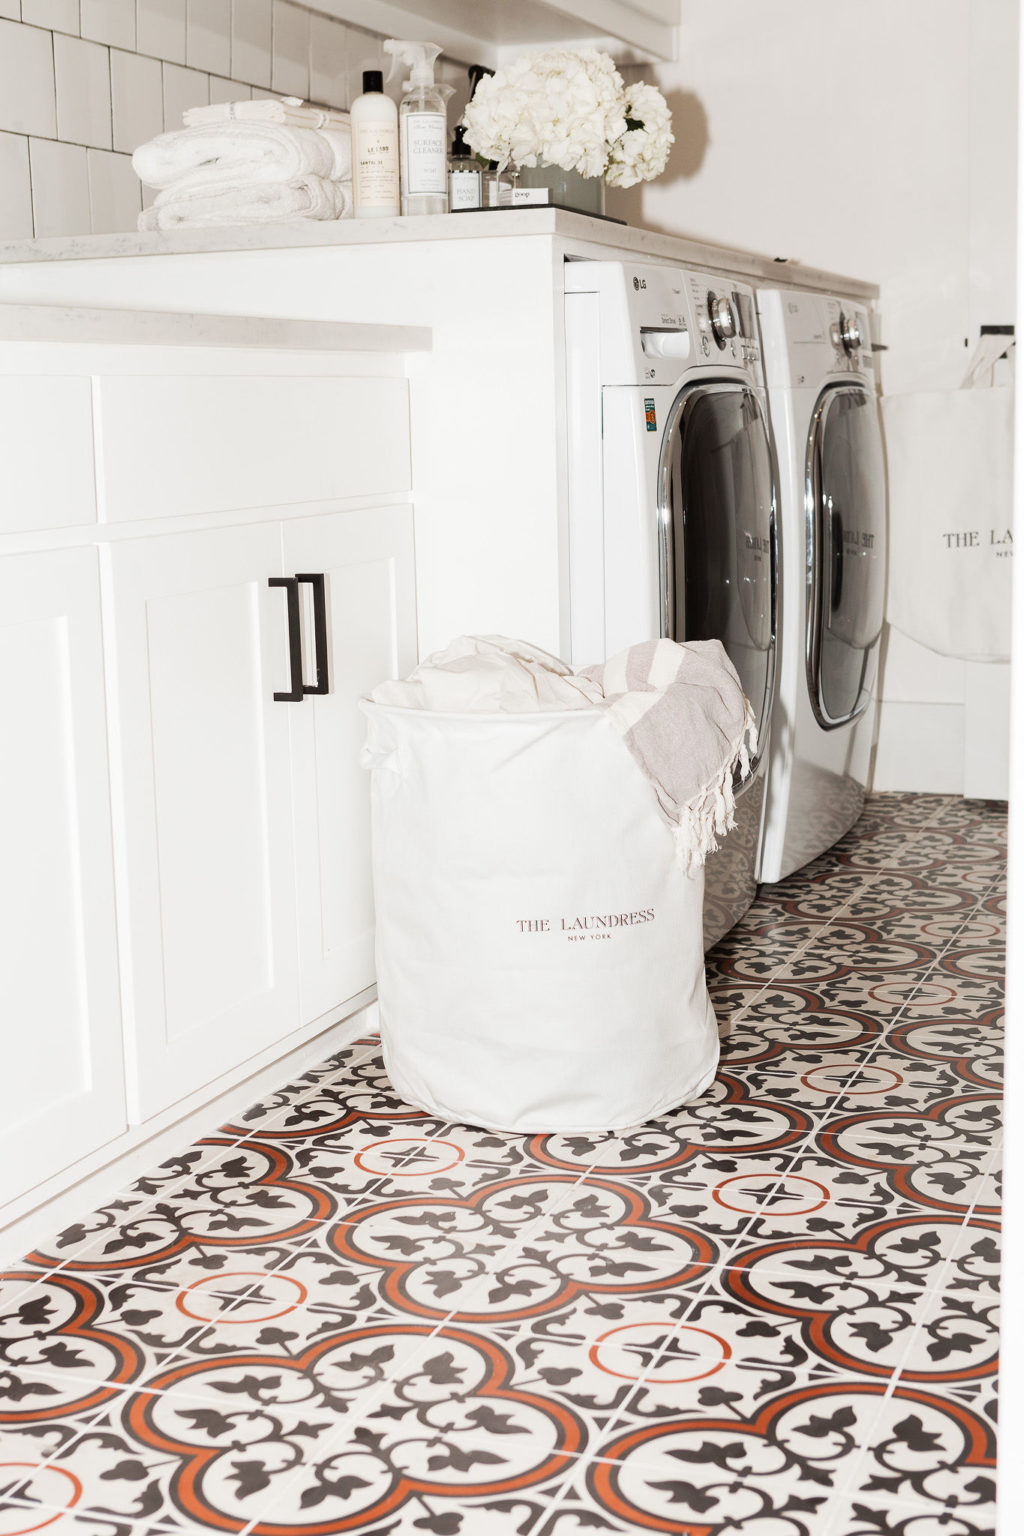 5 Tips for Hosting Holiday Houseguests (and a Look at Our Laundry Room!)